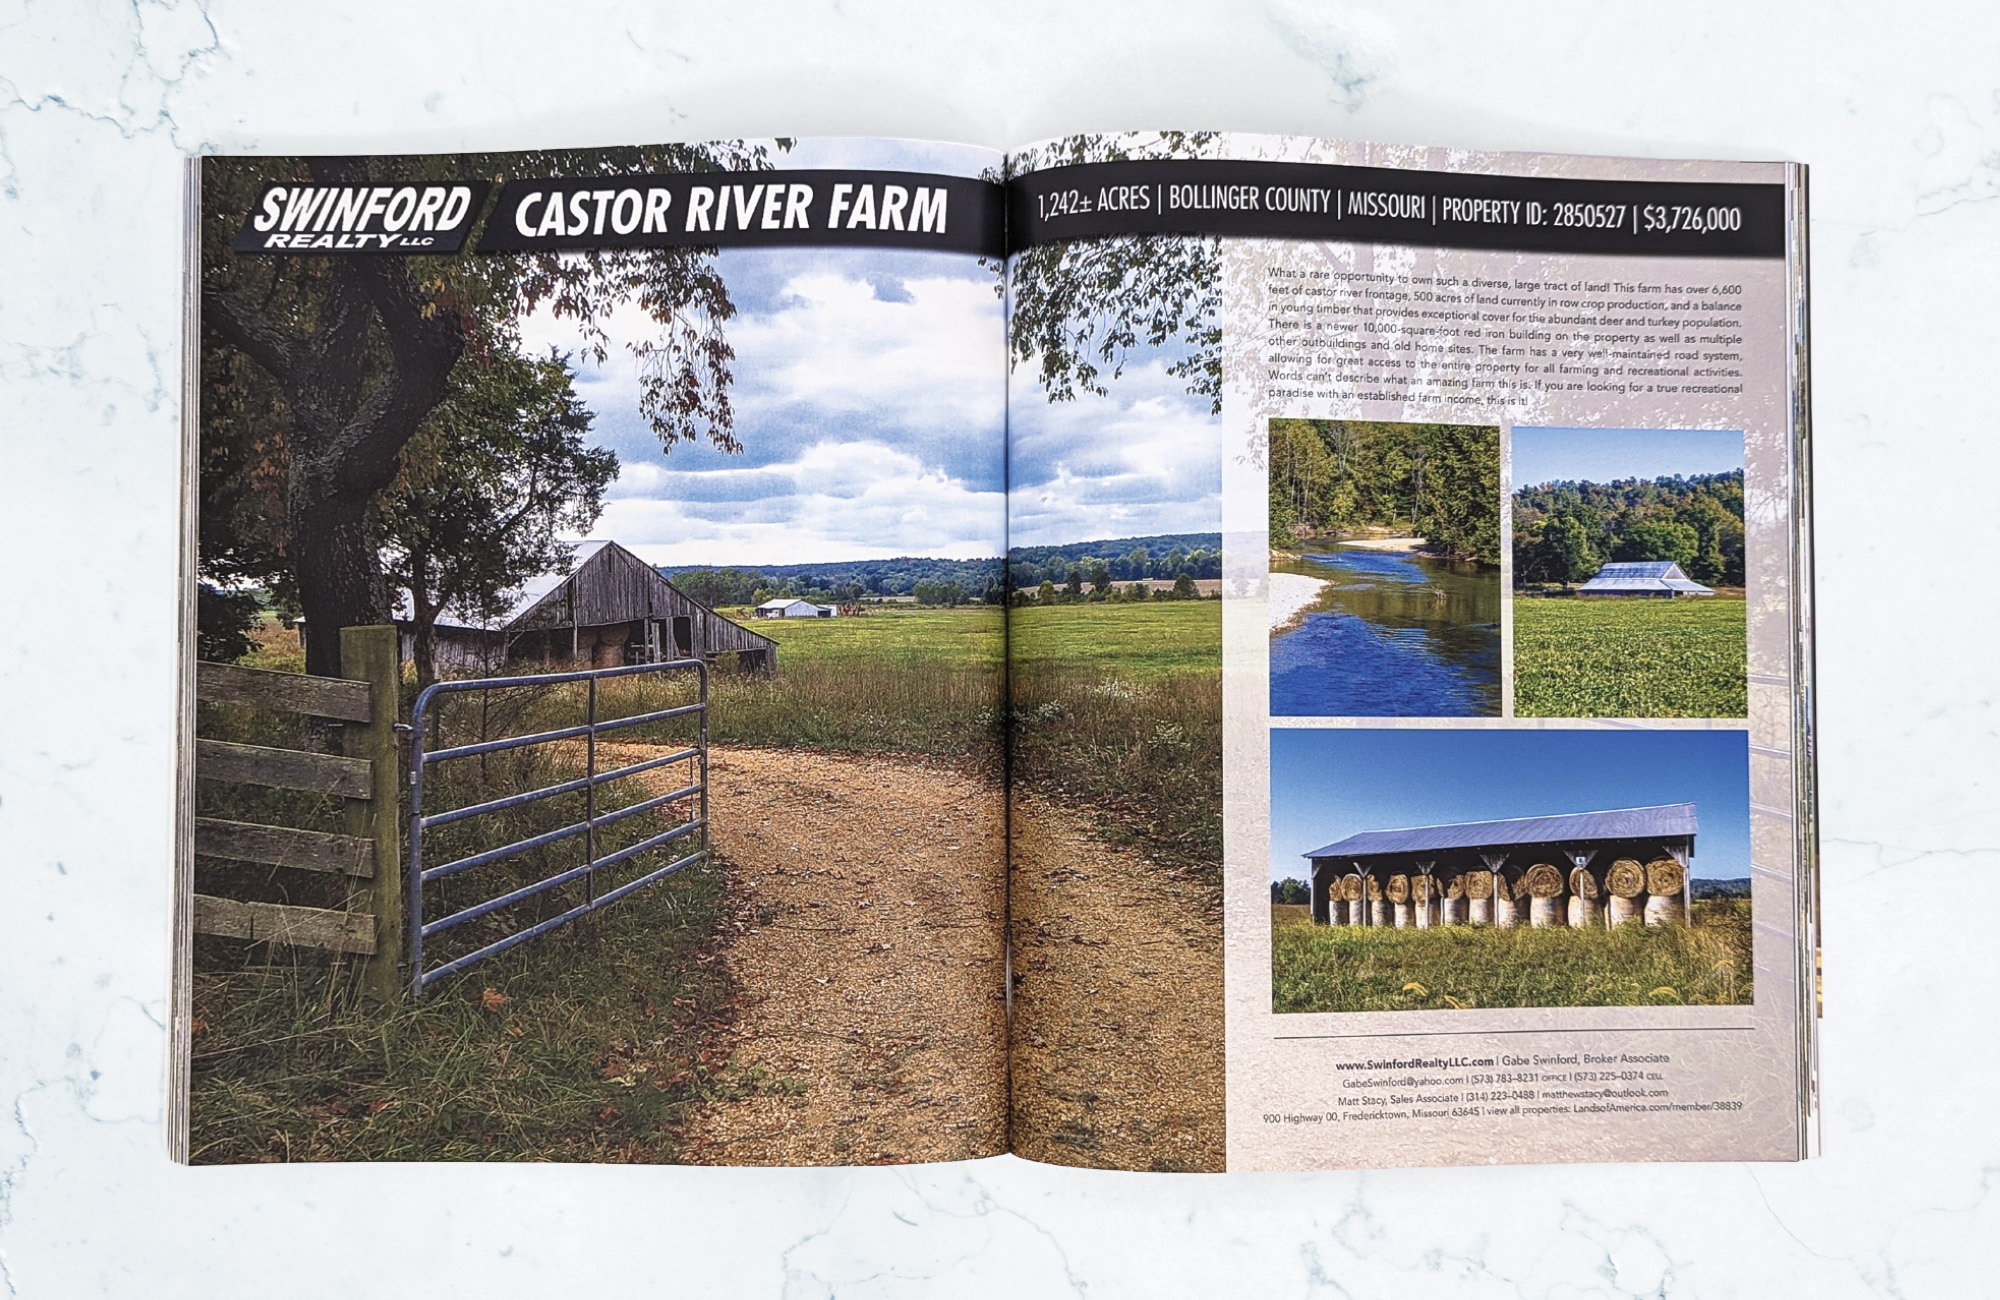 A magazine on a light marbled surface. The magazine is open to a showcase property listing, Castor River Farm, for Swinford Realty. The main photo spans across two pages and depicts an open metal gate and a dirt path leading to a barn. There is a description of the property on the right with a picture of a lake, a field, and a storage shed for hay bales.